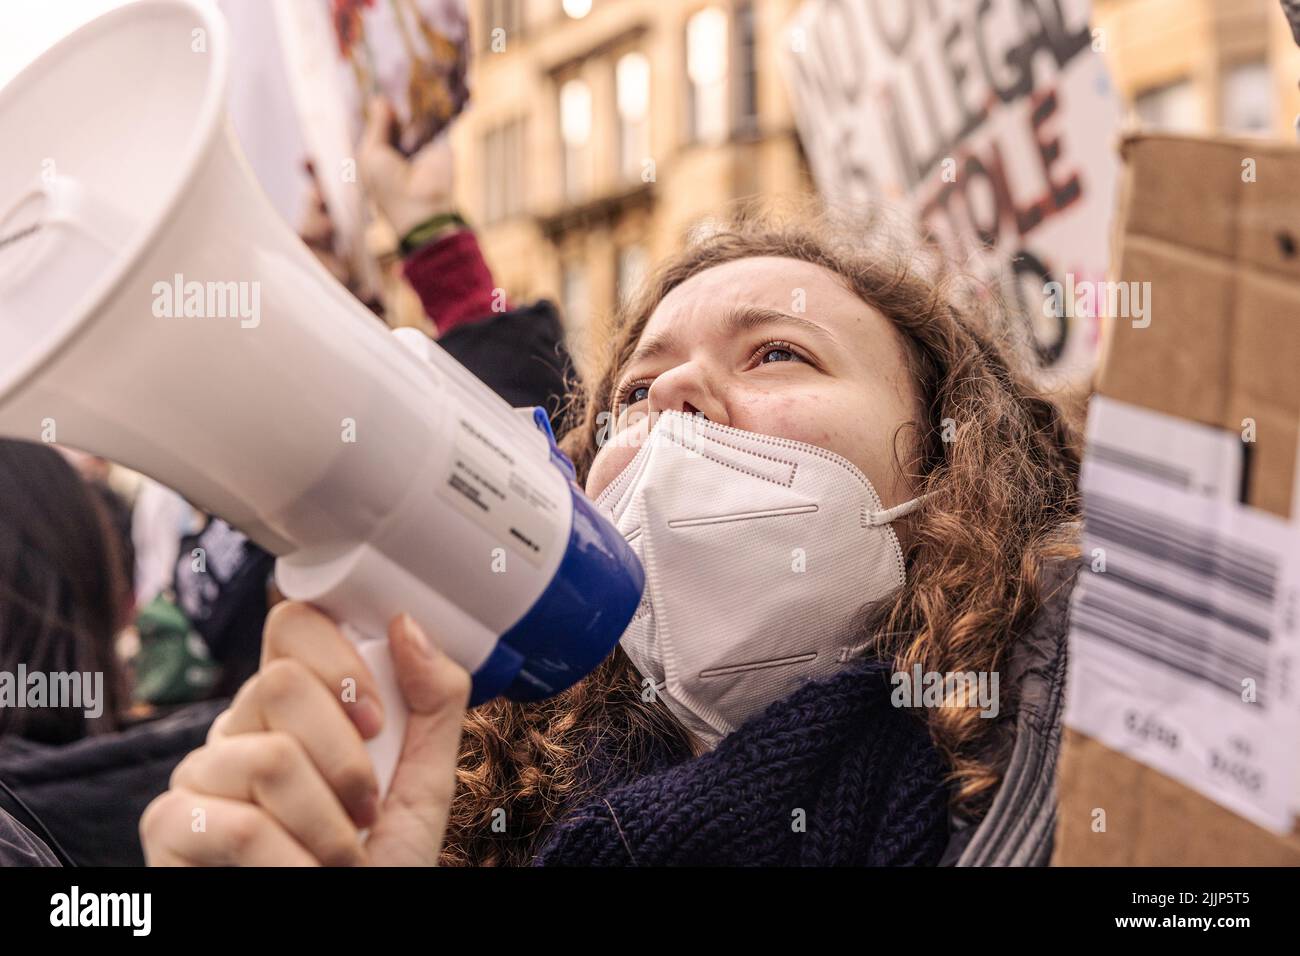 The people protesting against climate change in Glasgow, UK Stock Photo